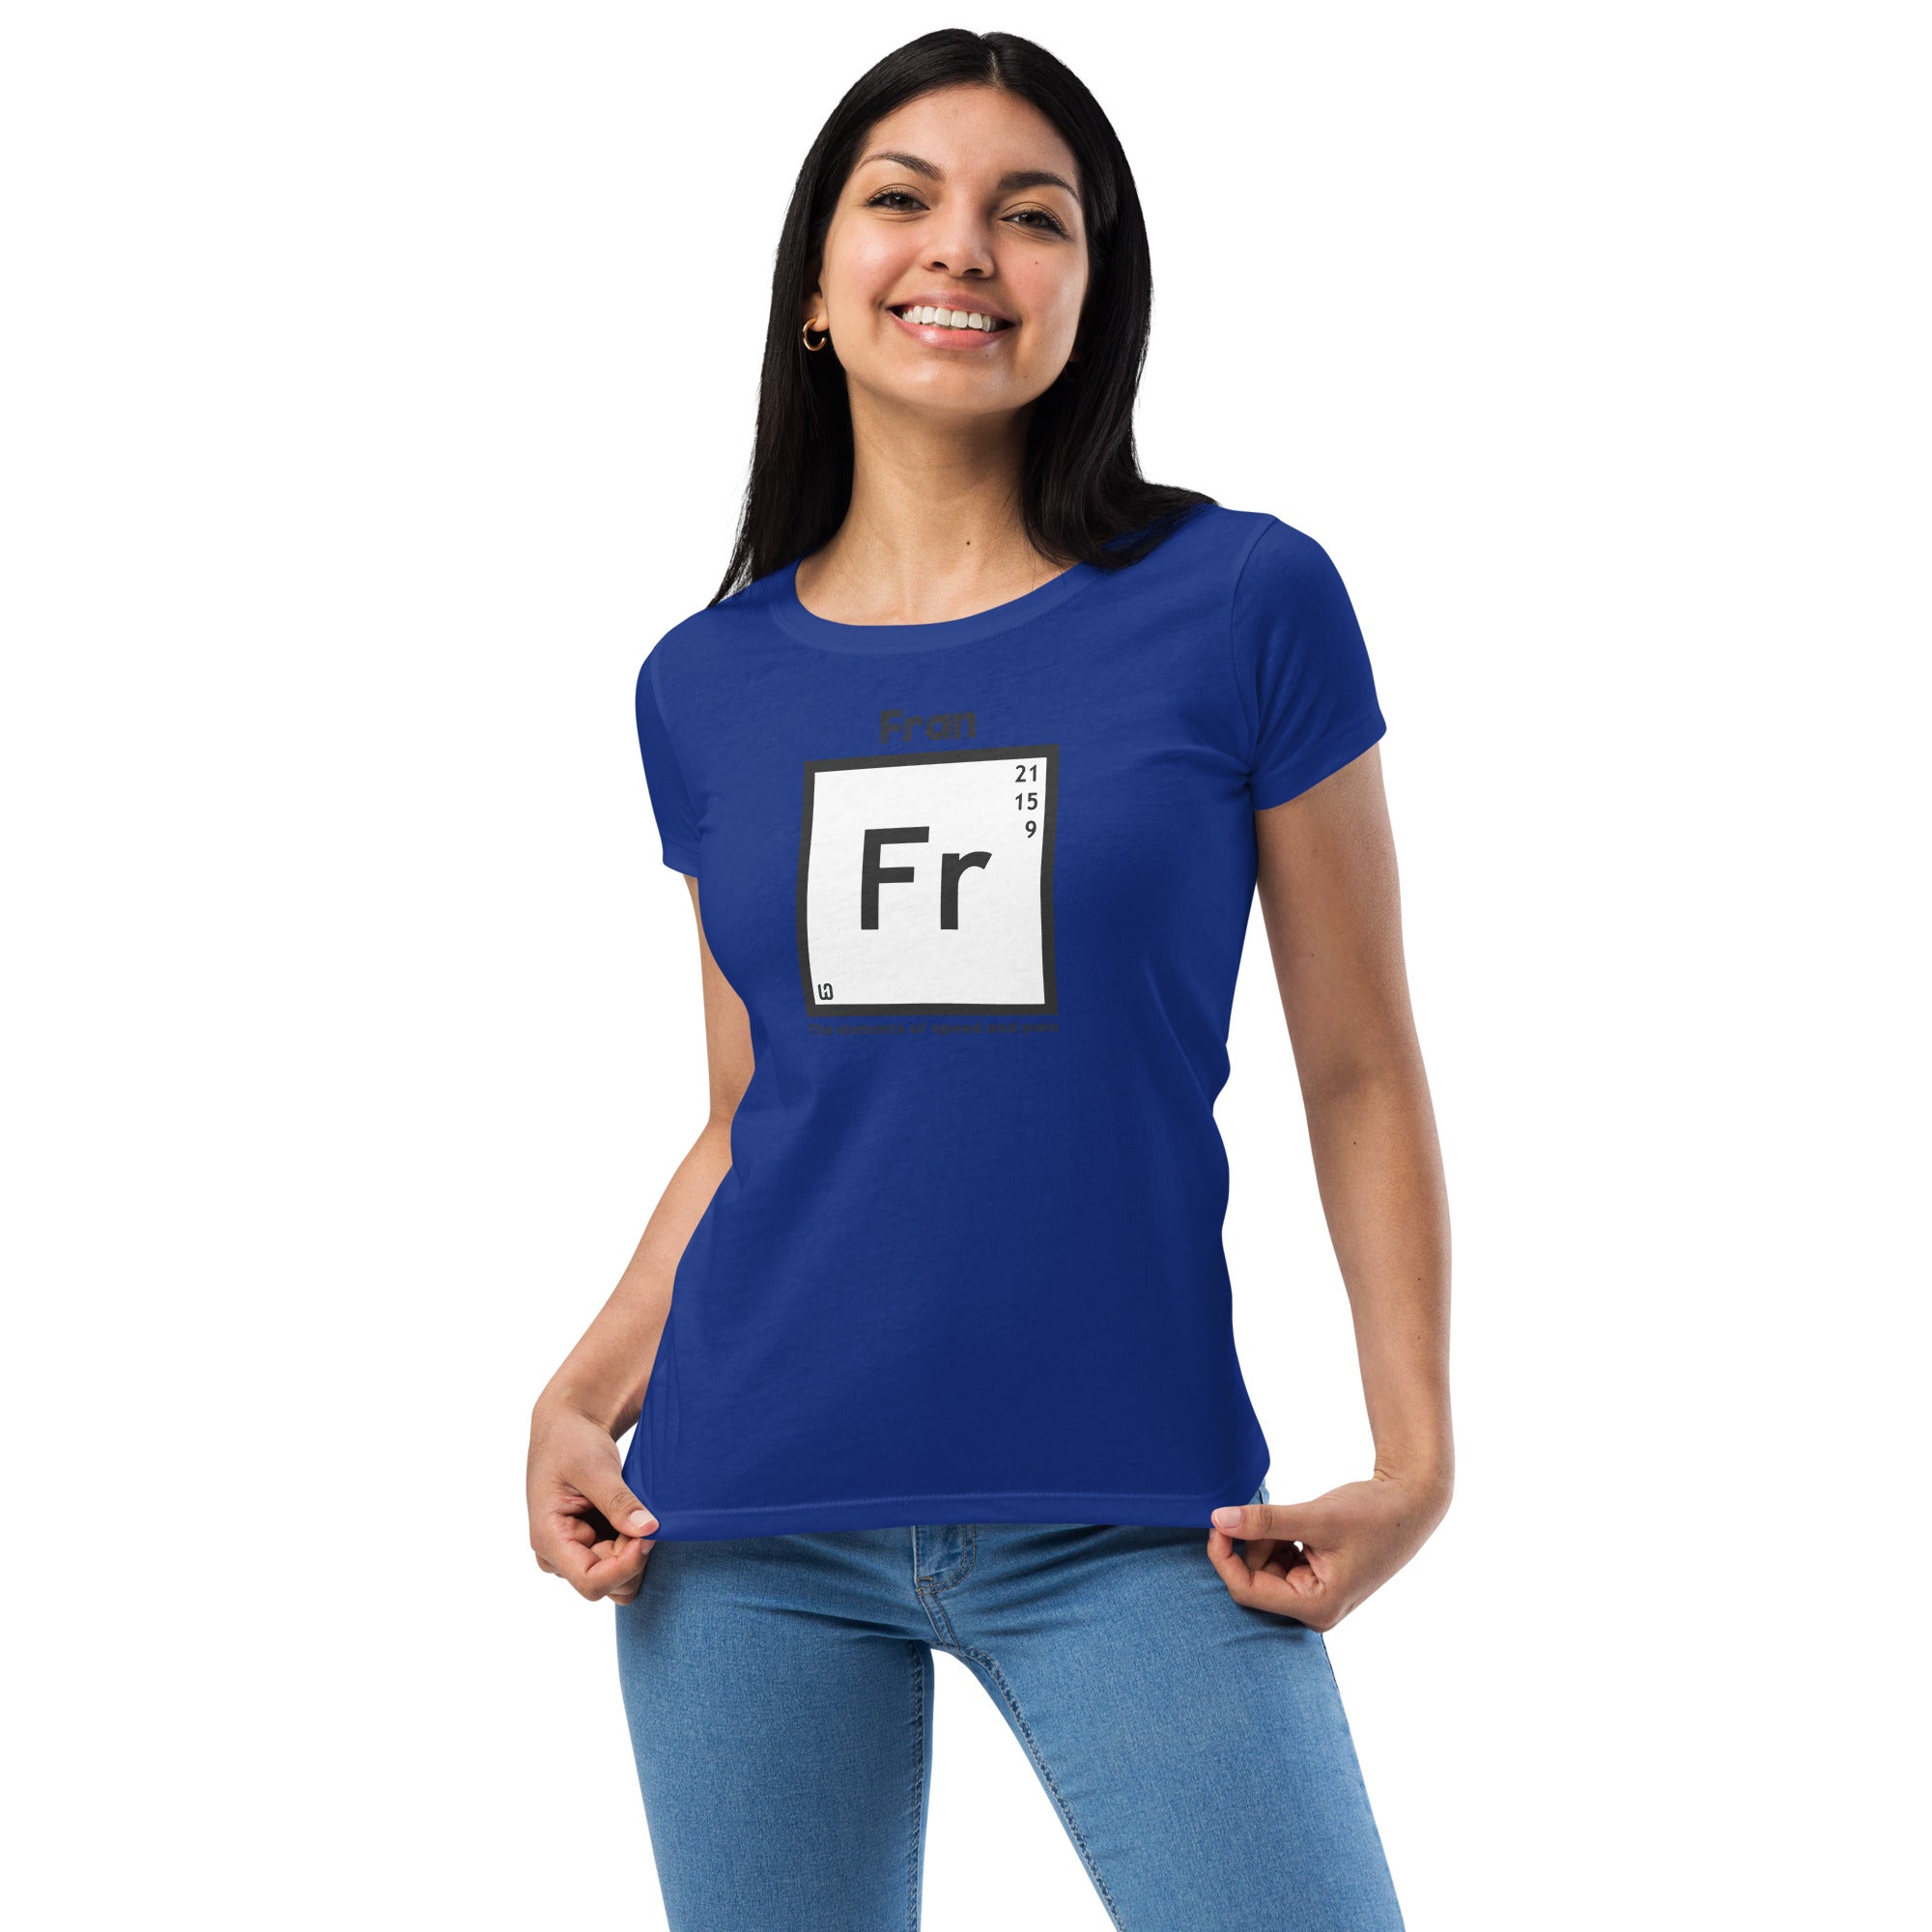 Fran Element Women’s fitted t-shirt - wodobsessed.com Cross Functional Training Apparel 